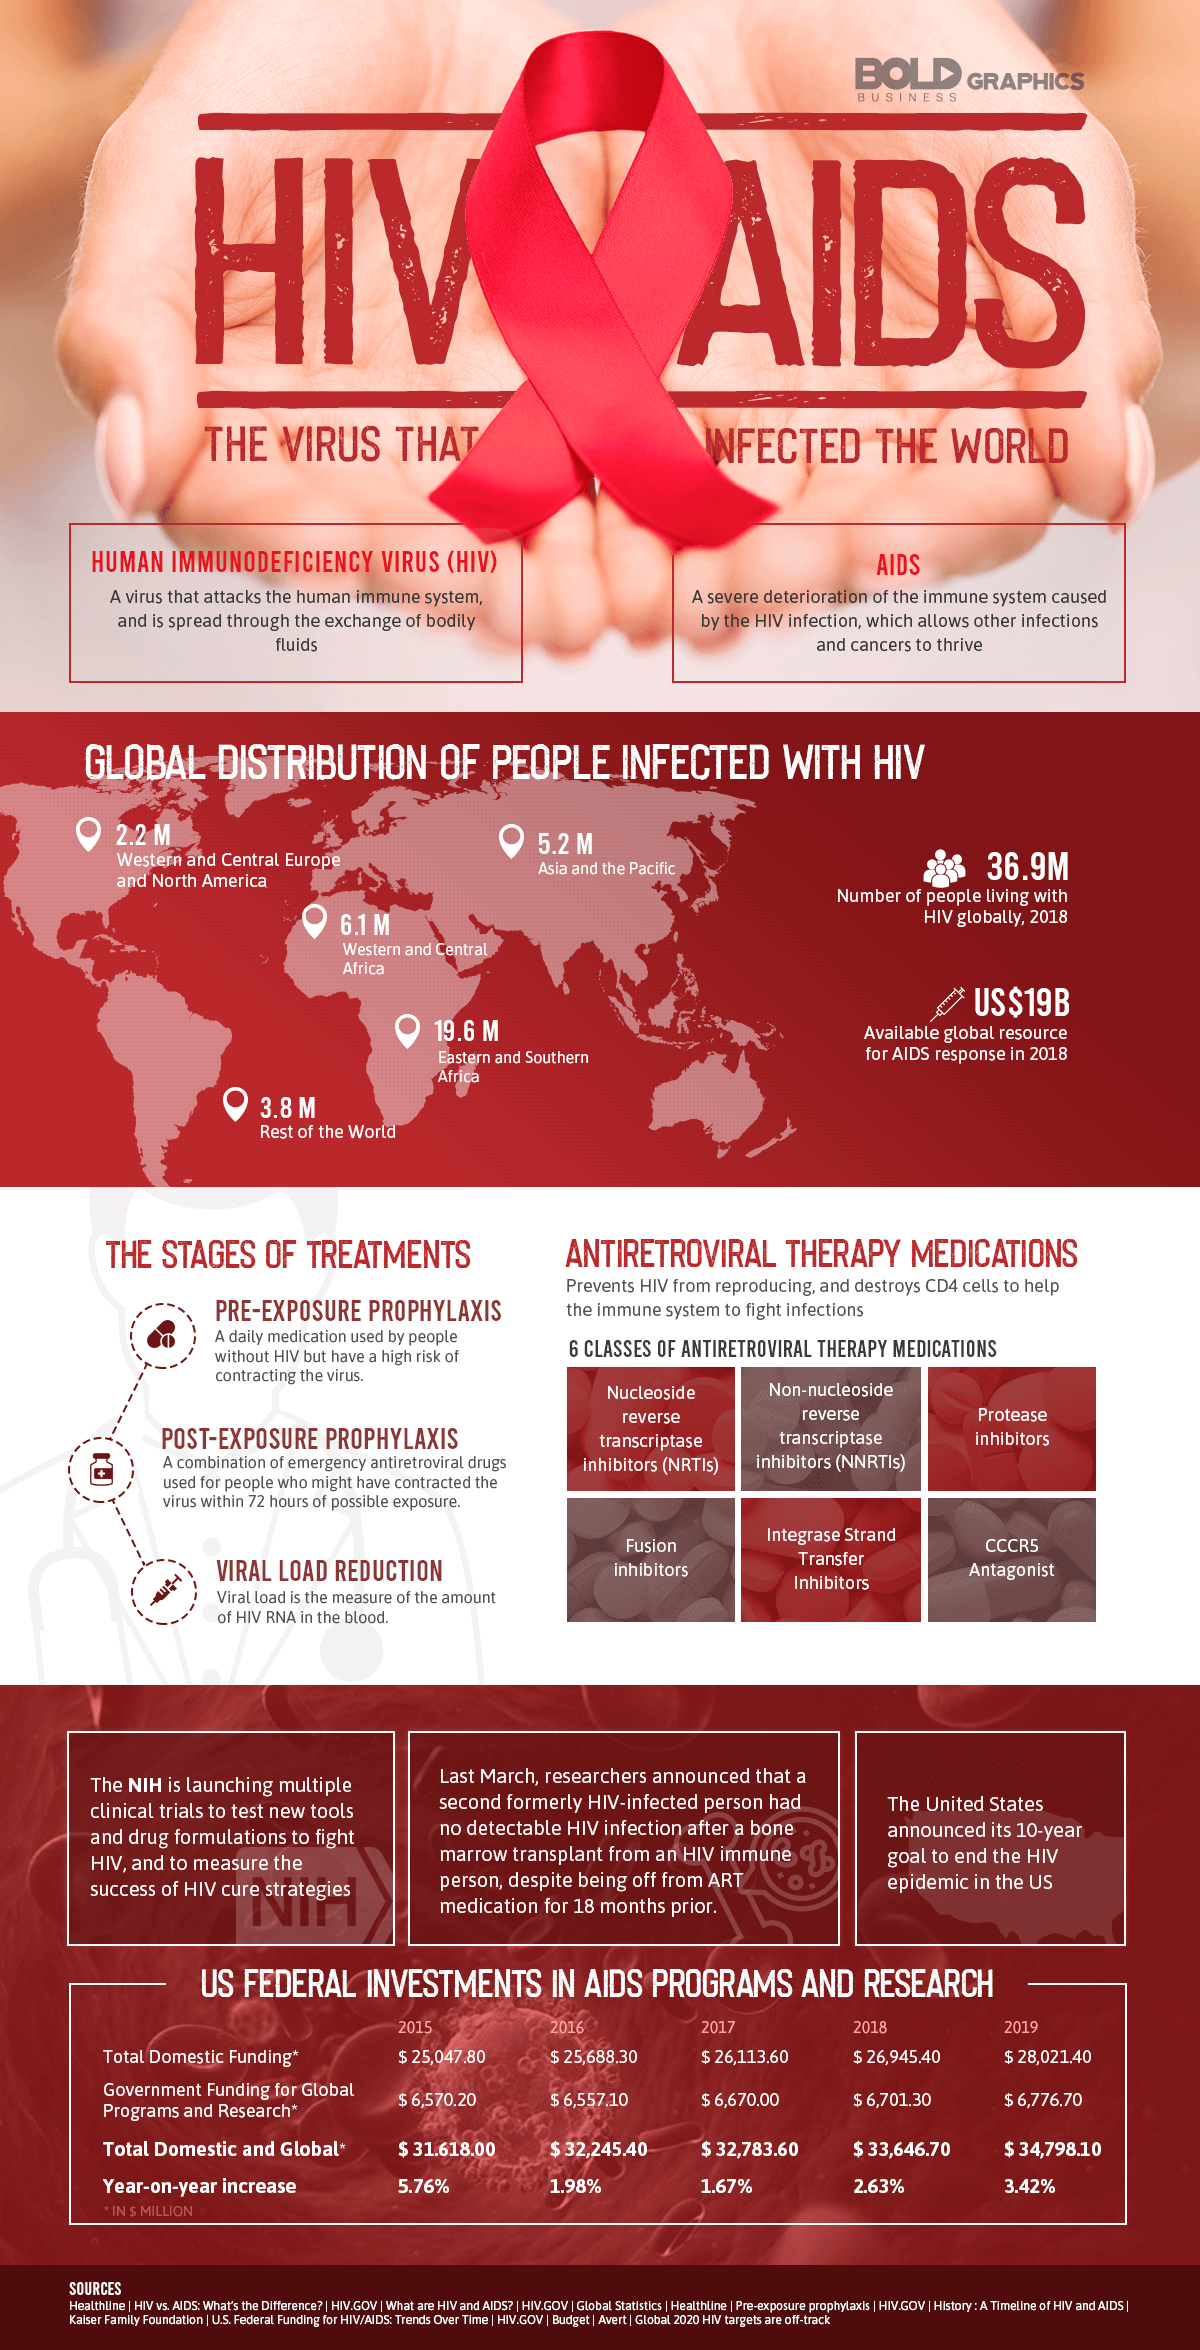 hiv-aids-infographic-bold-business